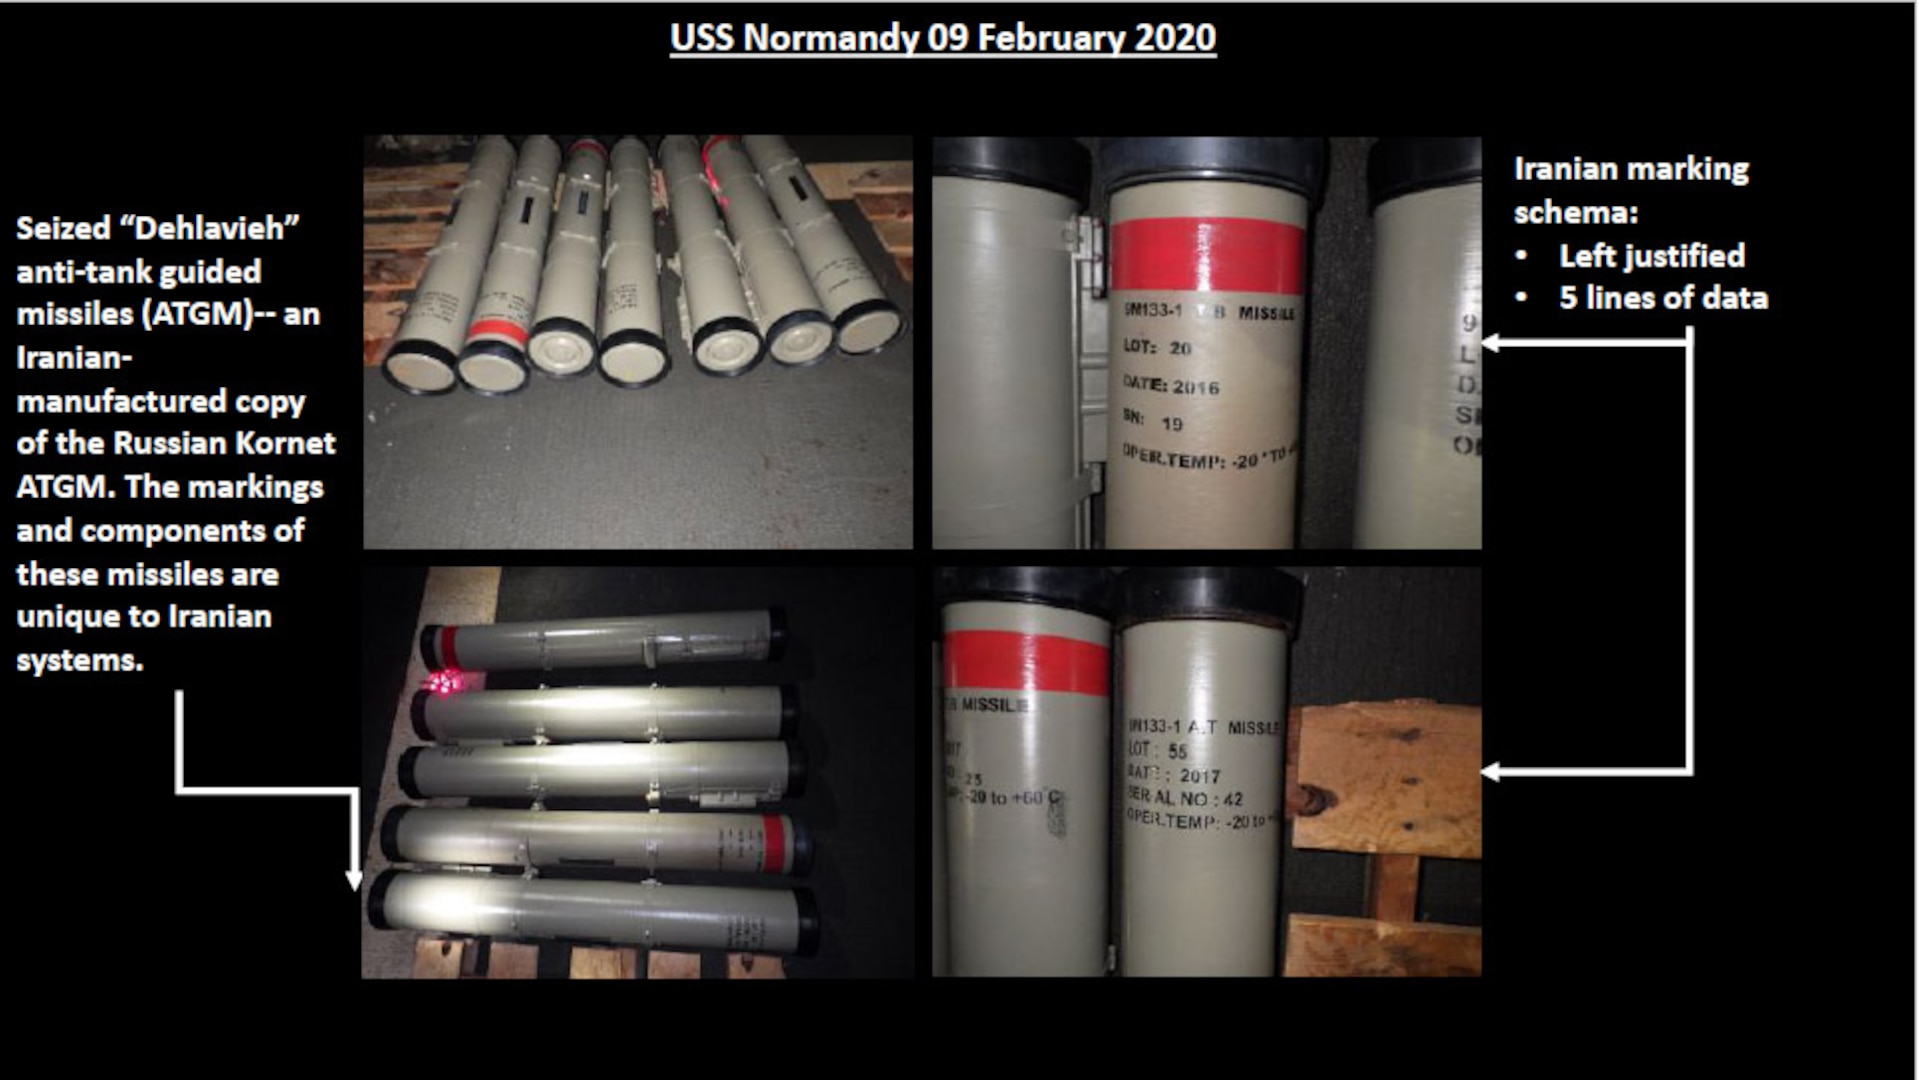 Here's a slide showing some of the 150 missiles seized by the USS NORMANDY in February. The United States assesses these missiles are, again, the Iranian DEH-LA-VIA anti-tank guided missile.  You can see all the same telltale signs.